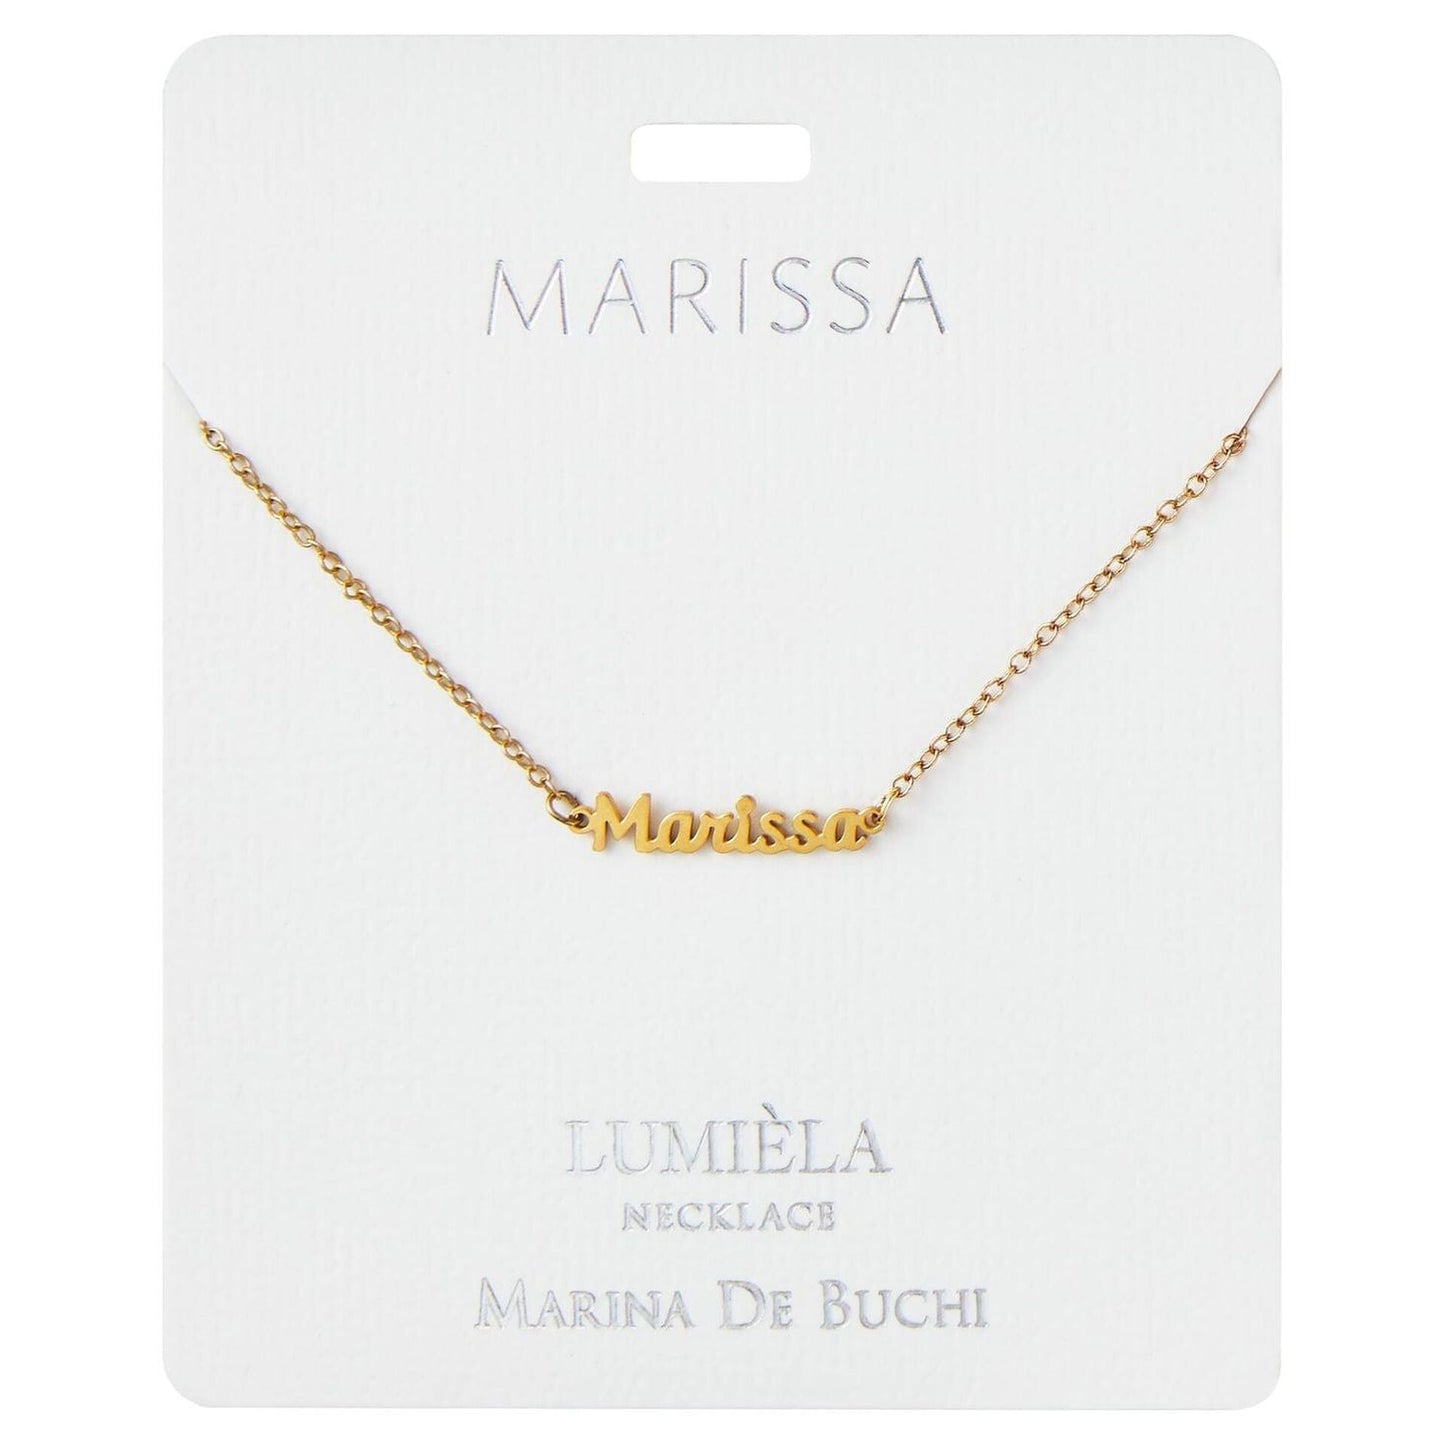 Lumiela Personalized Nameplate Erin Necklace in Gold Tone